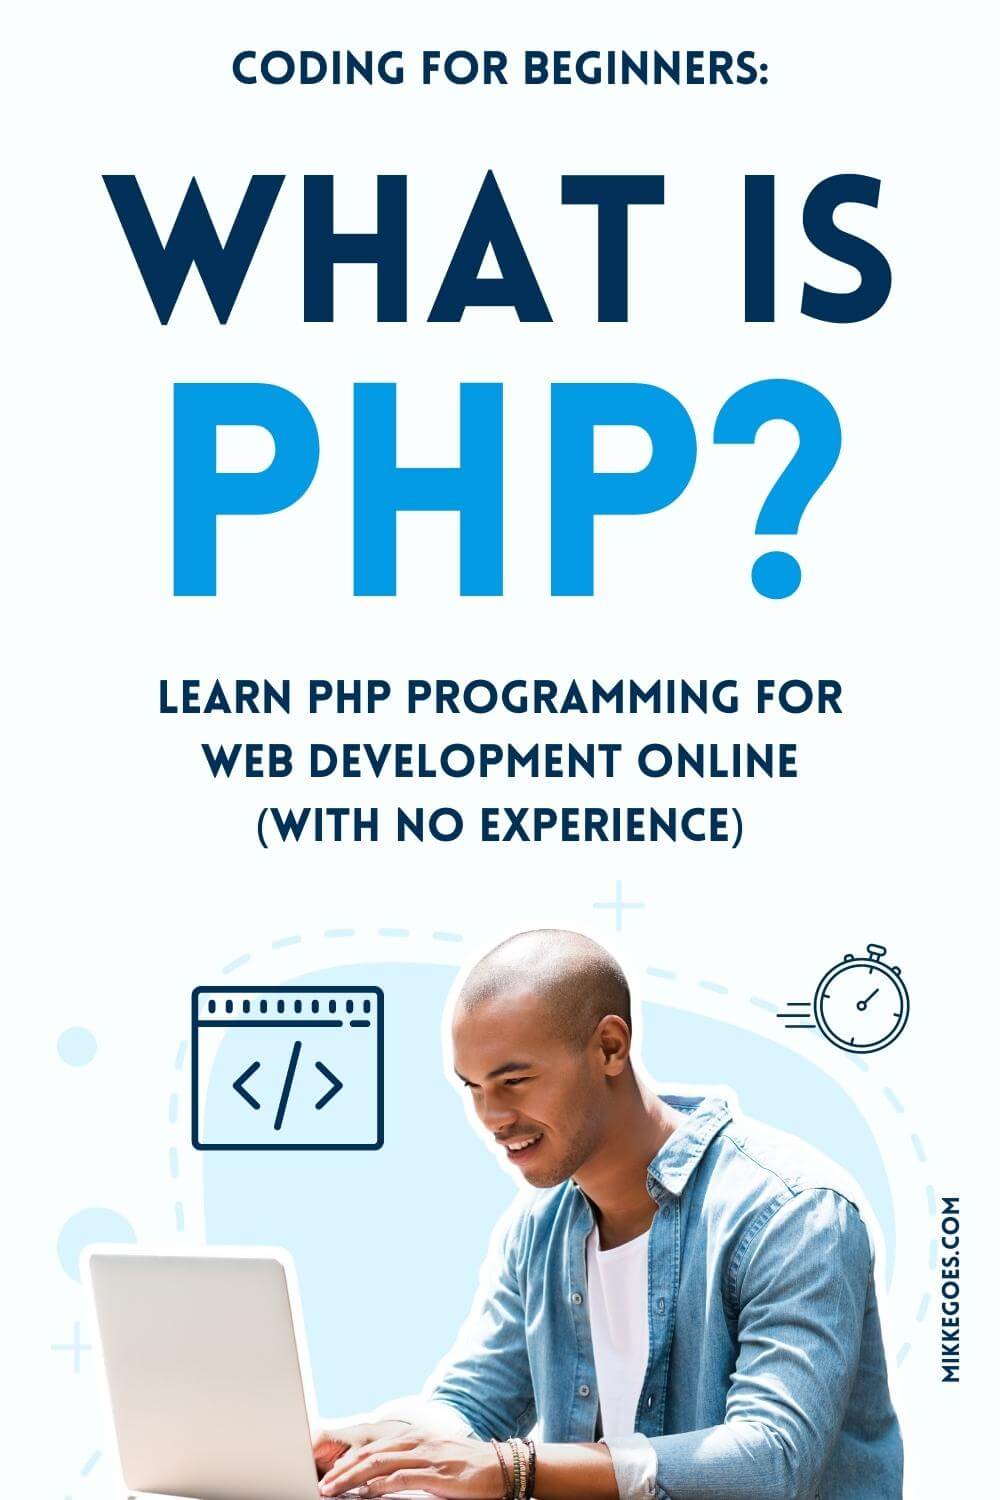 What Is PHP? How It Works And How To Learn PHP for Beginners